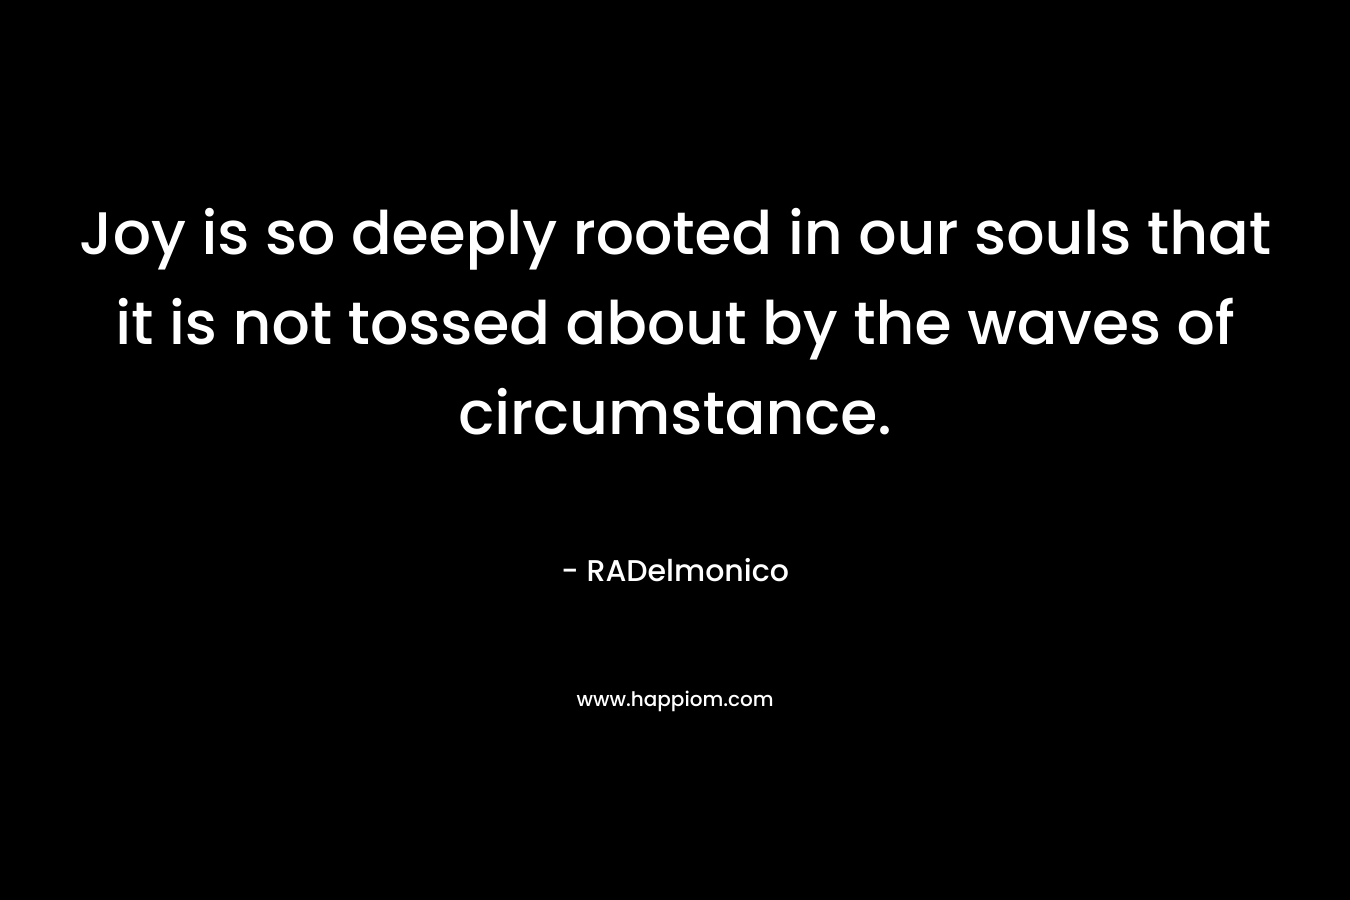 Joy is so deeply rooted in our souls that it is not tossed about by the waves of circumstance.